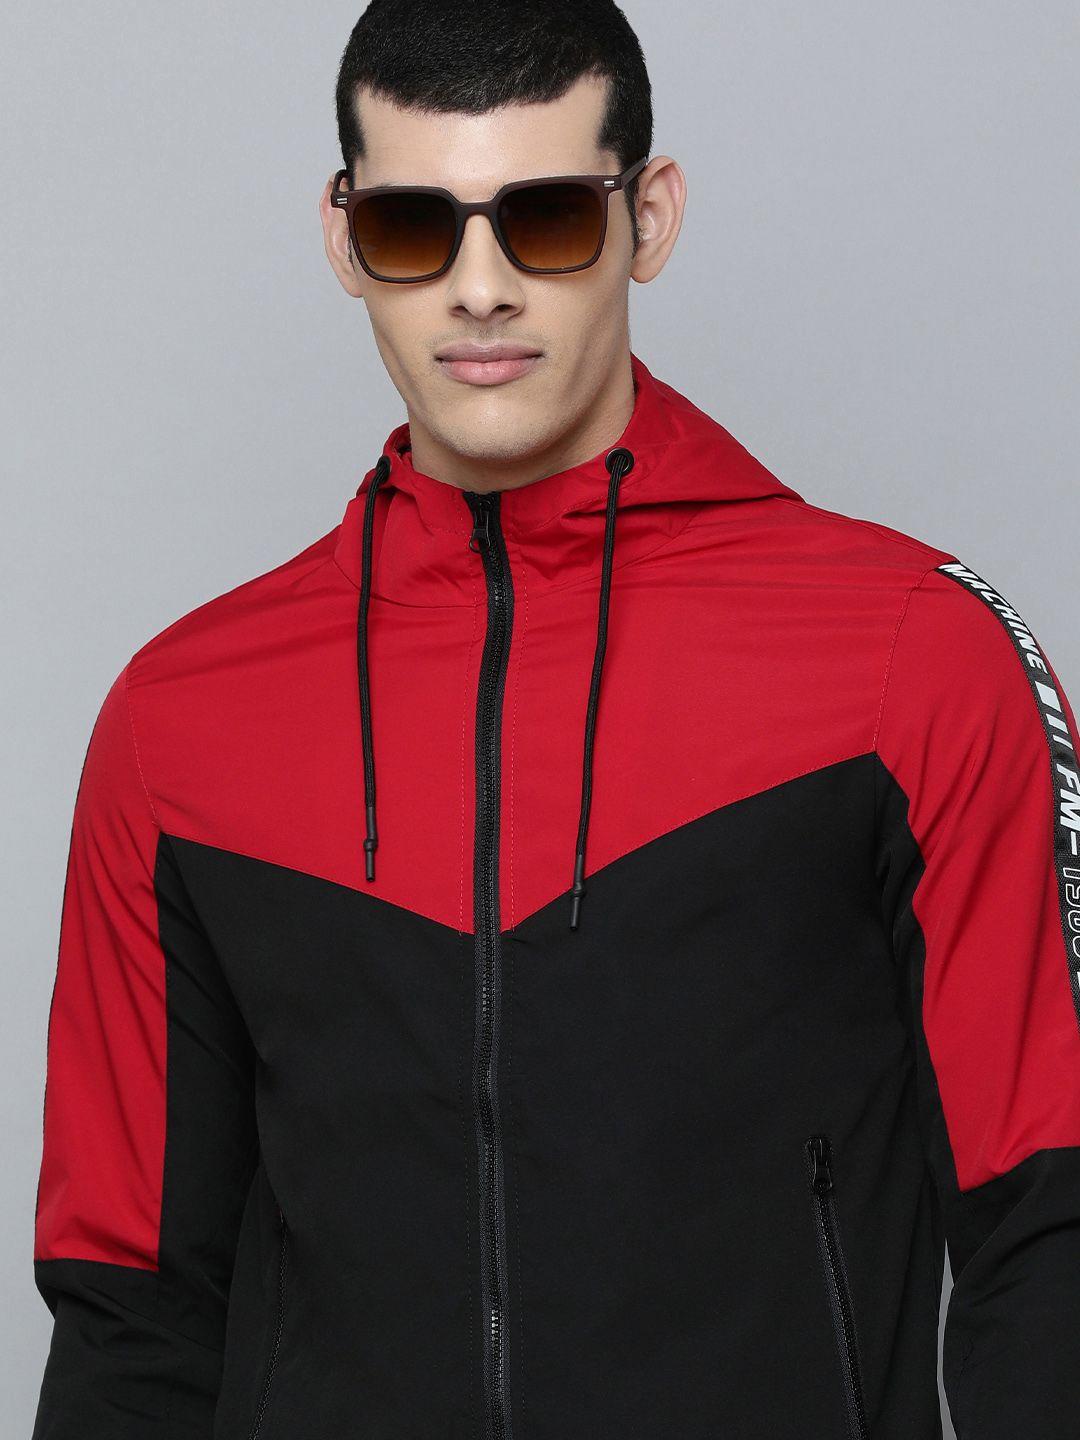 flying machine men red and black colourblocked hooded tailored jacket